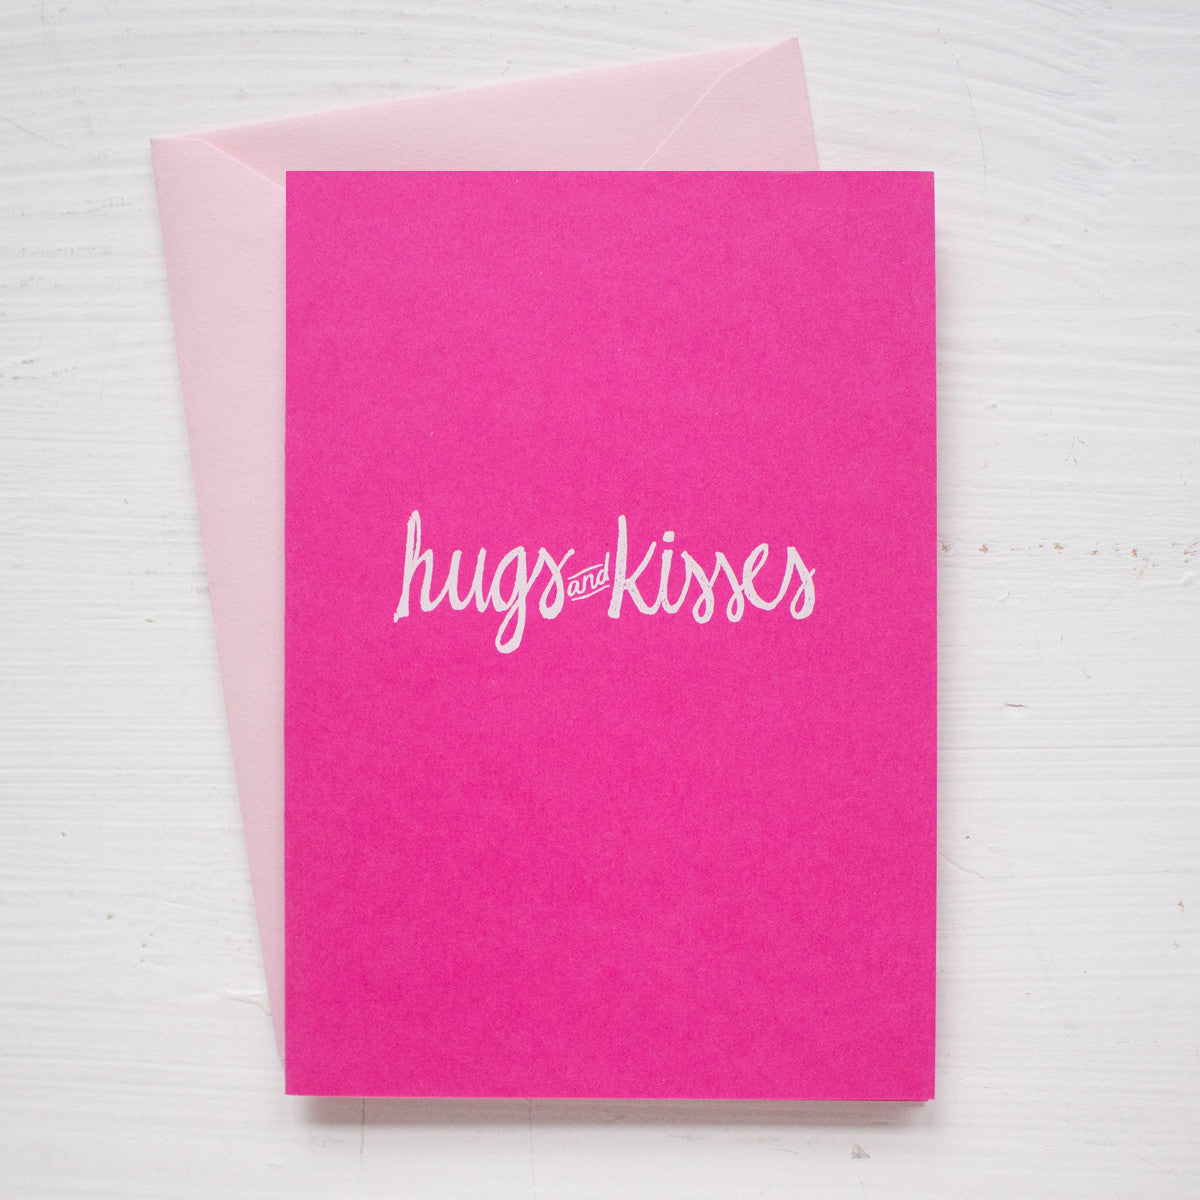 HUGS and KISSES folded notecards